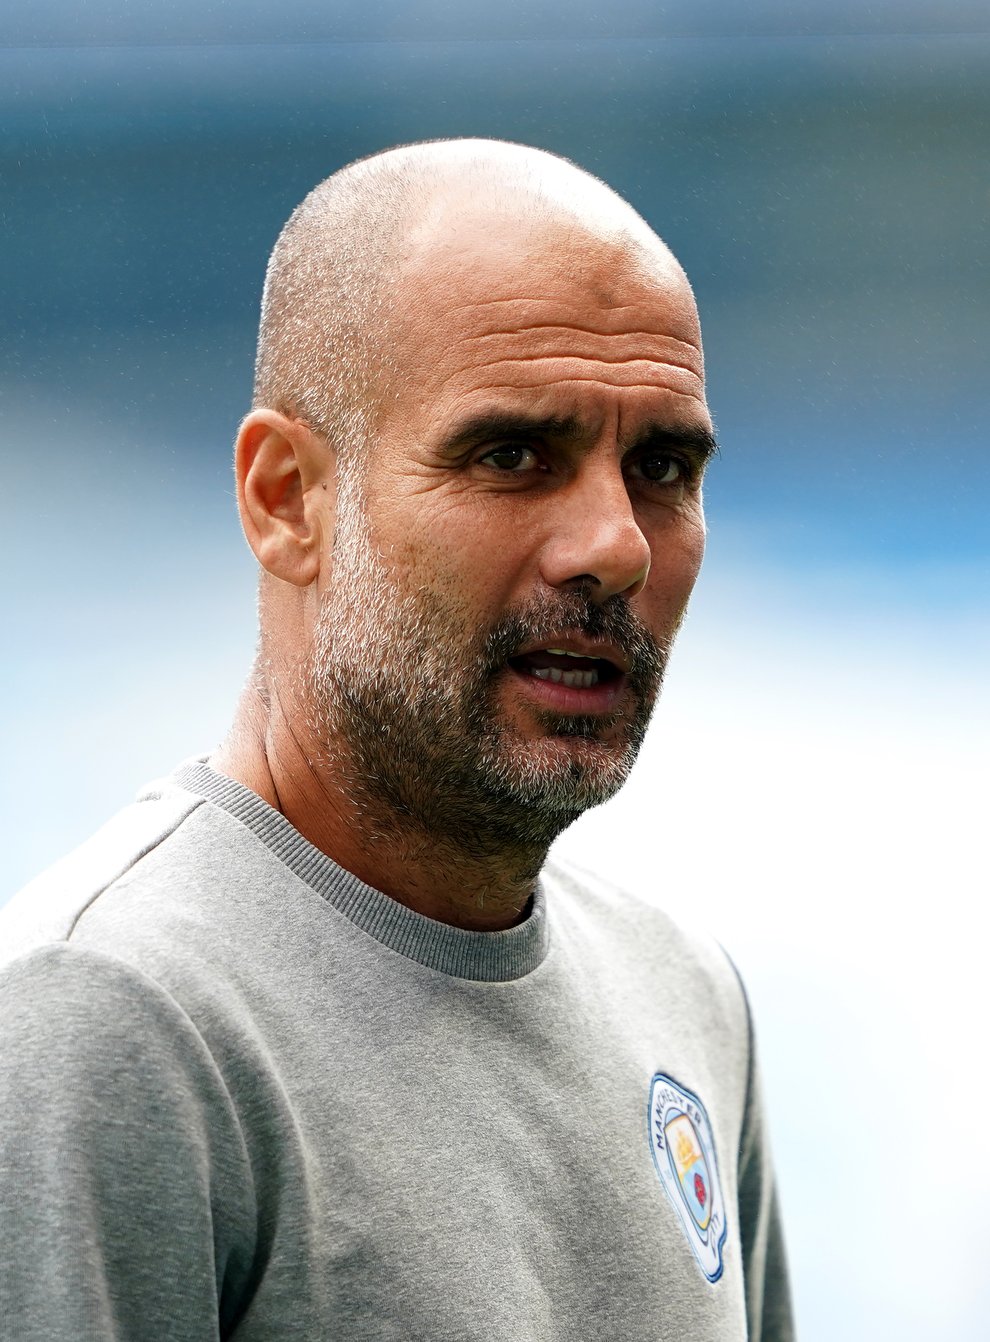 Pep Guardiola feels Manchester City have been hit as hard as other clubs by Covid-19 infections (Zac Goodwin/PA)